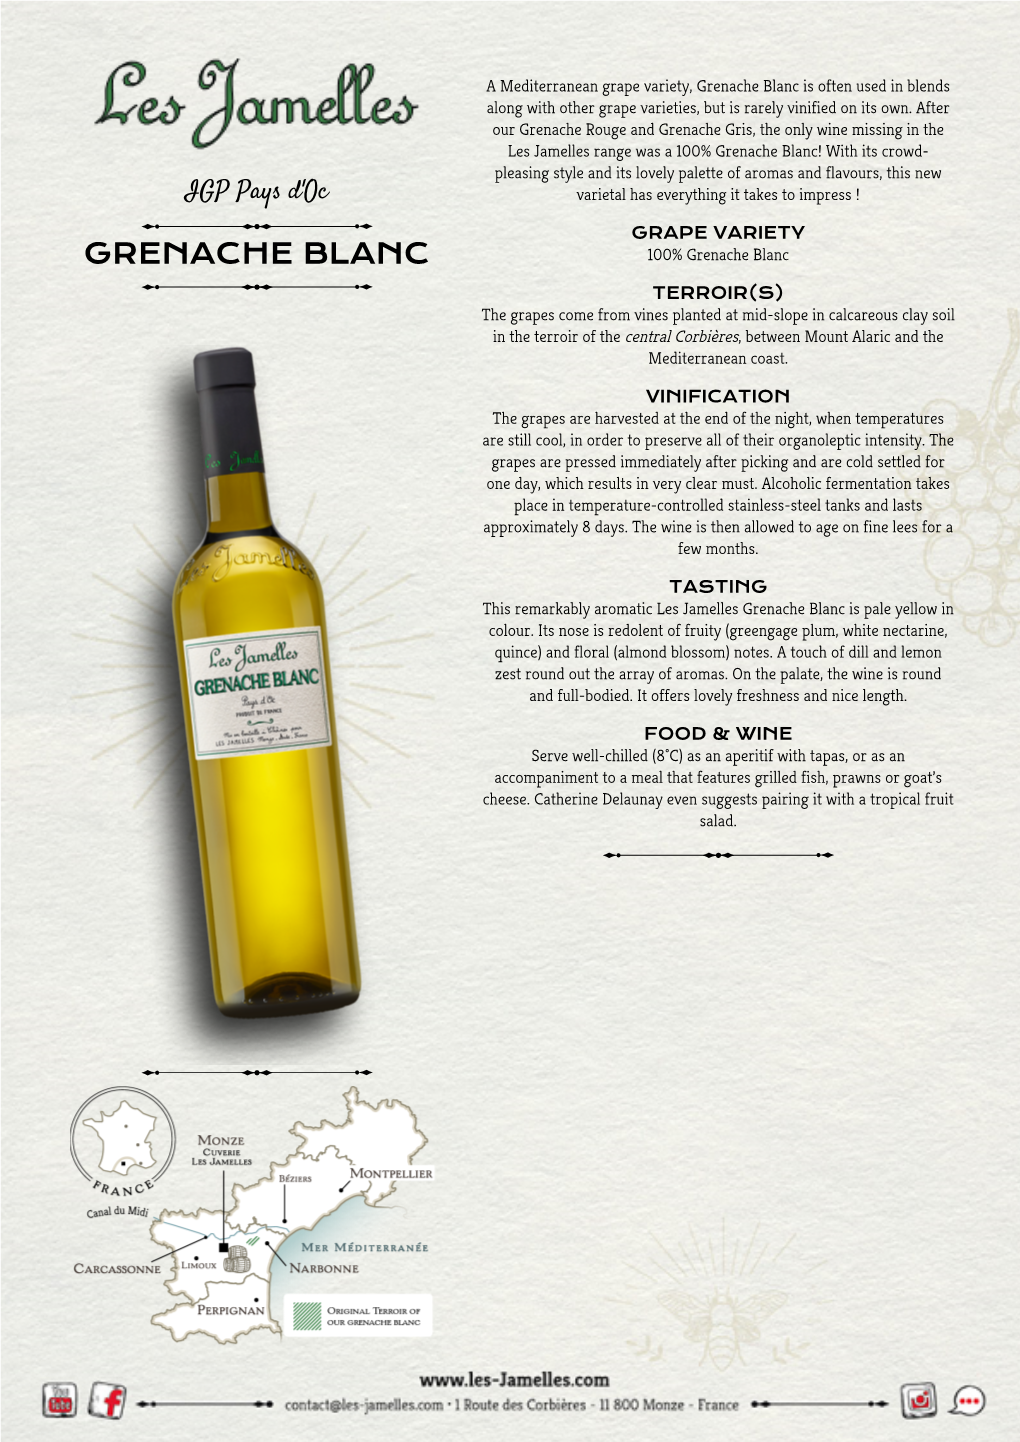 Grenache Blanc Is Often Used in Blends Along with Other Grape Varieties, but Is Rarely Vinified on Its Own